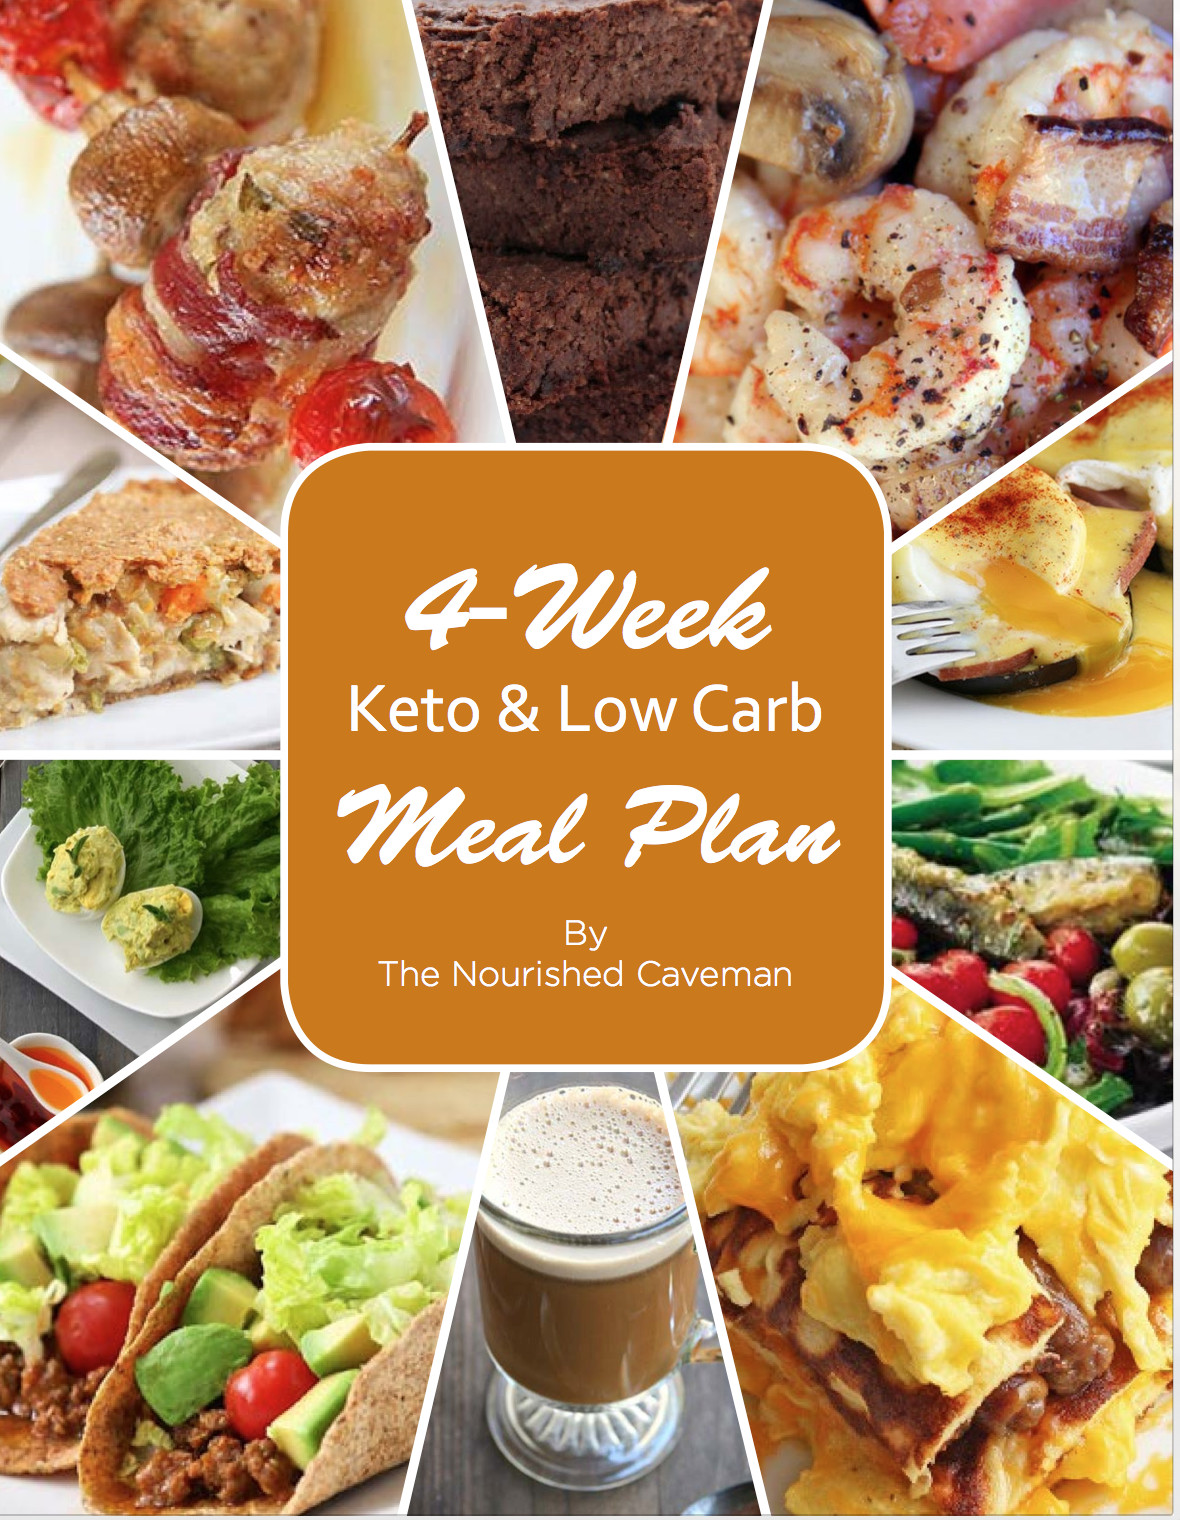 Low Carb Keto Foods
 4 Week Keto & Low Carb Meal Plan The Nourished Caveman